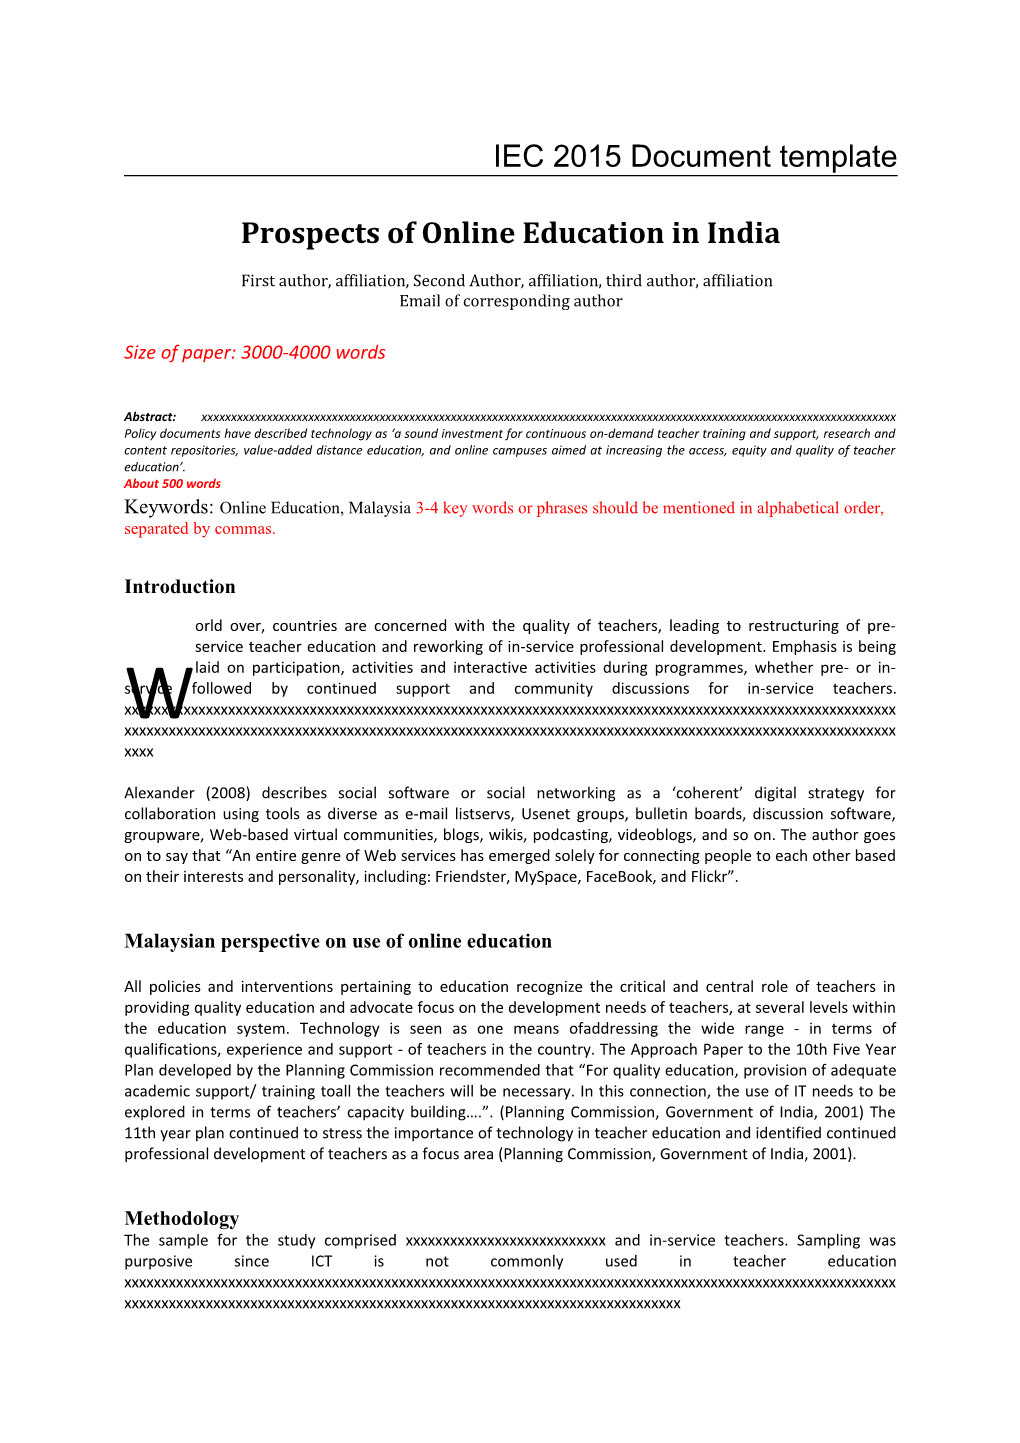 Prospects of Online Education in India